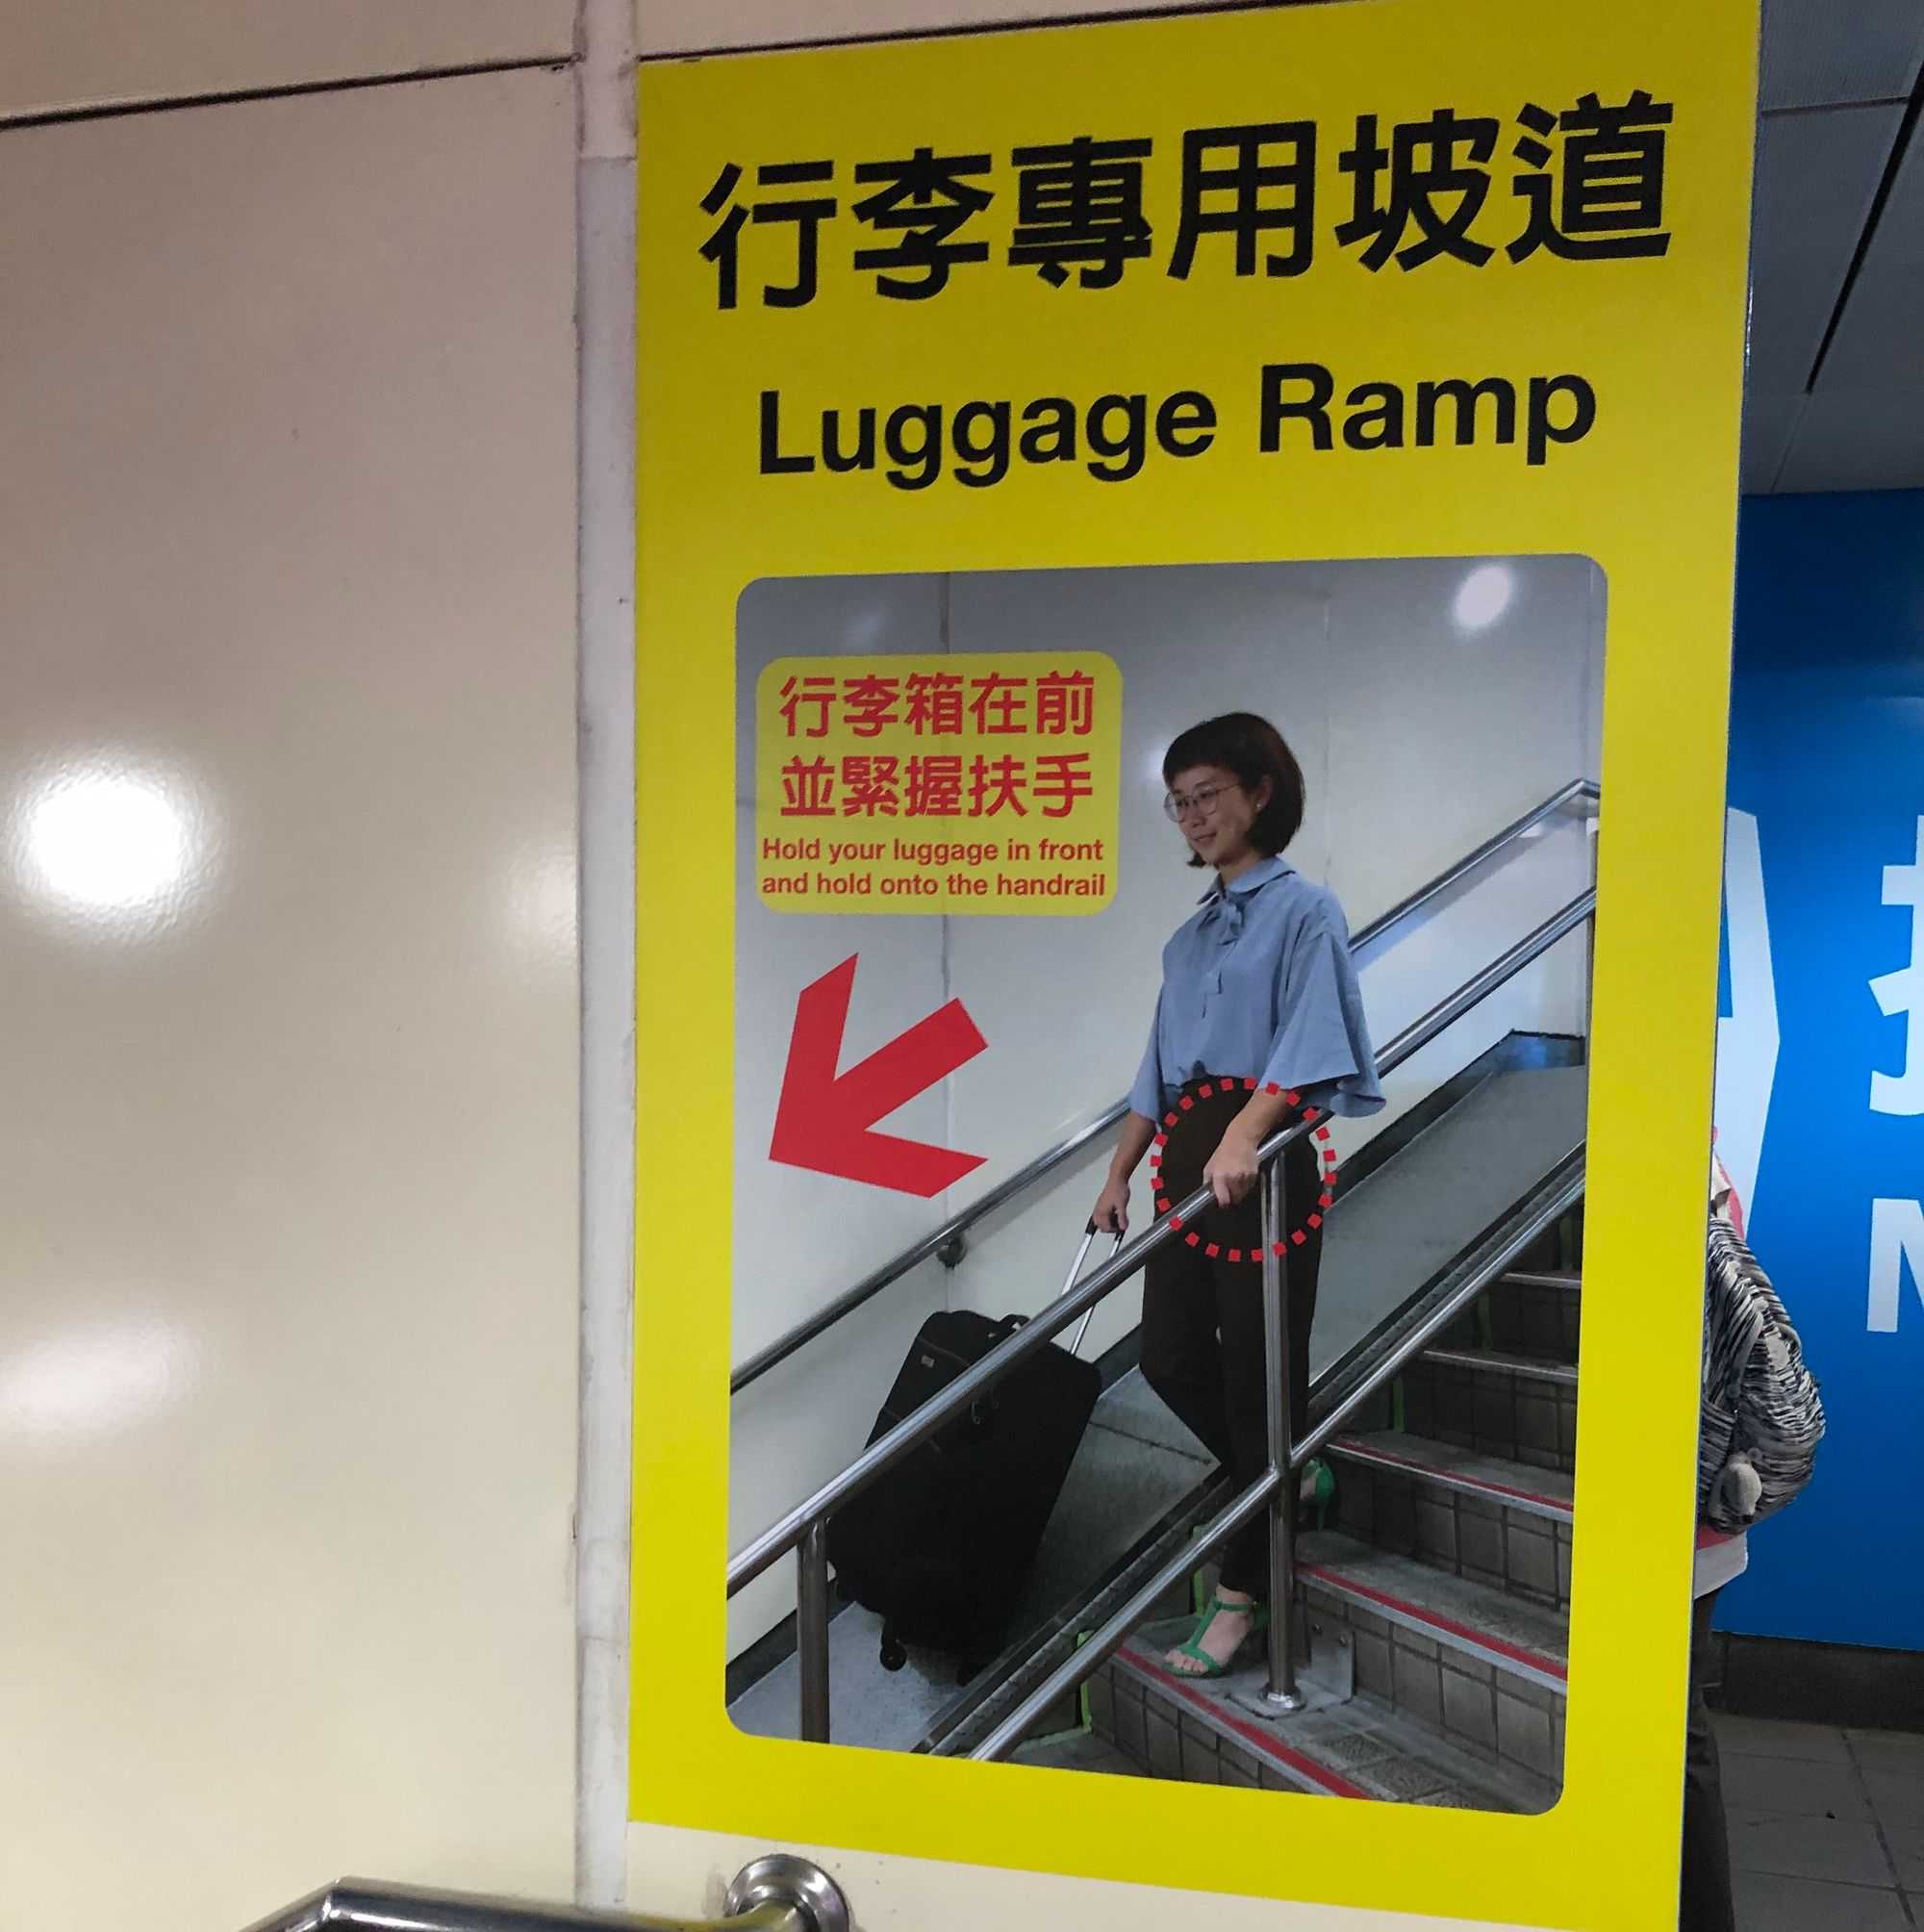 Using the luggage ramp inside a metro station